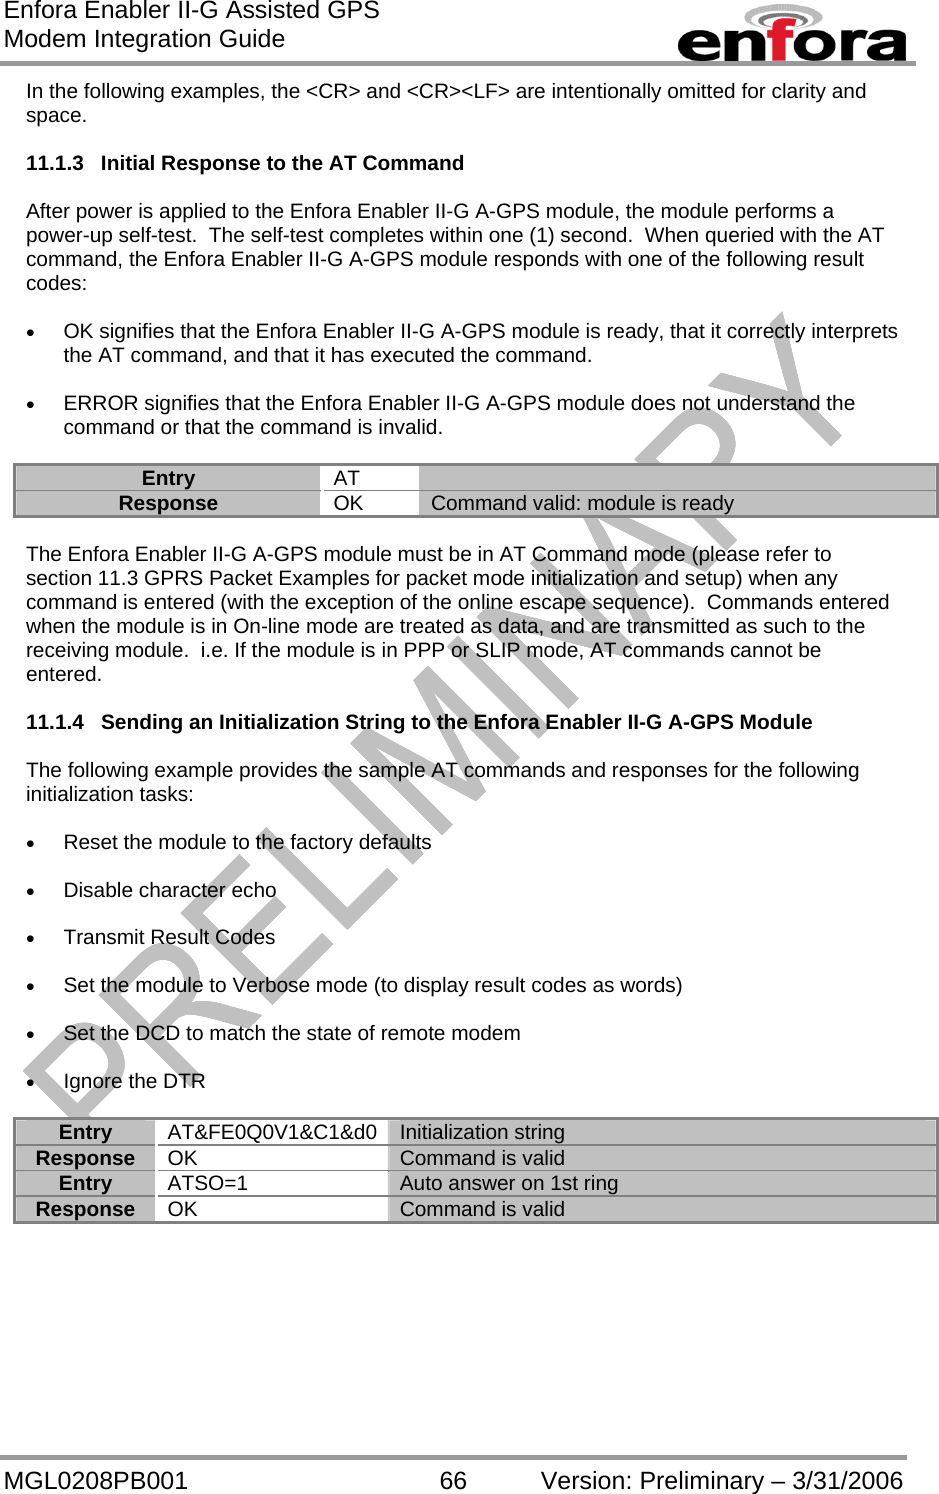 Enfora Enabler II-G Assisted GPS Modem Integration Guide MGL0208PB001 66 Version: Preliminary – 3/31/2006 In the following examples, the &lt;CR&gt; and &lt;CR&gt;&lt;LF&gt; are intentionally omitted for clarity and space.  11.1.3  Initial Response to the AT Command  After power is applied to the Enfora Enabler II-G A-GPS module, the module performs a power-up self-test.  The self-test completes within one (1) second.  When queried with the AT command, the Enfora Enabler II-G A-GPS module responds with one of the following result codes:  •  OK signifies that the Enfora Enabler II-G A-GPS module is ready, that it correctly interprets the AT command, and that it has executed the command.  •  ERROR signifies that the Enfora Enabler II-G A-GPS module does not understand the command or that the command is invalid.  Entry  AT  Response  OK  Command valid: module is ready  The Enfora Enabler II-G A-GPS module must be in AT Command mode (please refer to section 11.3 GPRS Packet Examples for packet mode initialization and setup) when any command is entered (with the exception of the online escape sequence).  Commands entered when the module is in On-line mode are treated as data, and are transmitted as such to the receiving module.  i.e. If the module is in PPP or SLIP mode, AT commands cannot be entered.  11.1.4  Sending an Initialization String to the Enfora Enabler II-G A-GPS Module  The following example provides the sample AT commands and responses for the following initialization tasks:  •  Reset the module to the factory defaults  •  Disable character echo  •  Transmit Result Codes  •  Set the module to Verbose mode (to display result codes as words)  •  Set the DCD to match the state of remote modem  •  Ignore the DTR  Entry AT&amp;FE0Q0V1&amp;C1&amp;d0 Initialization string Response  OK  Command is valid Entry  ATSO=1  Auto answer on 1st ring Response  OK  Command is valid  